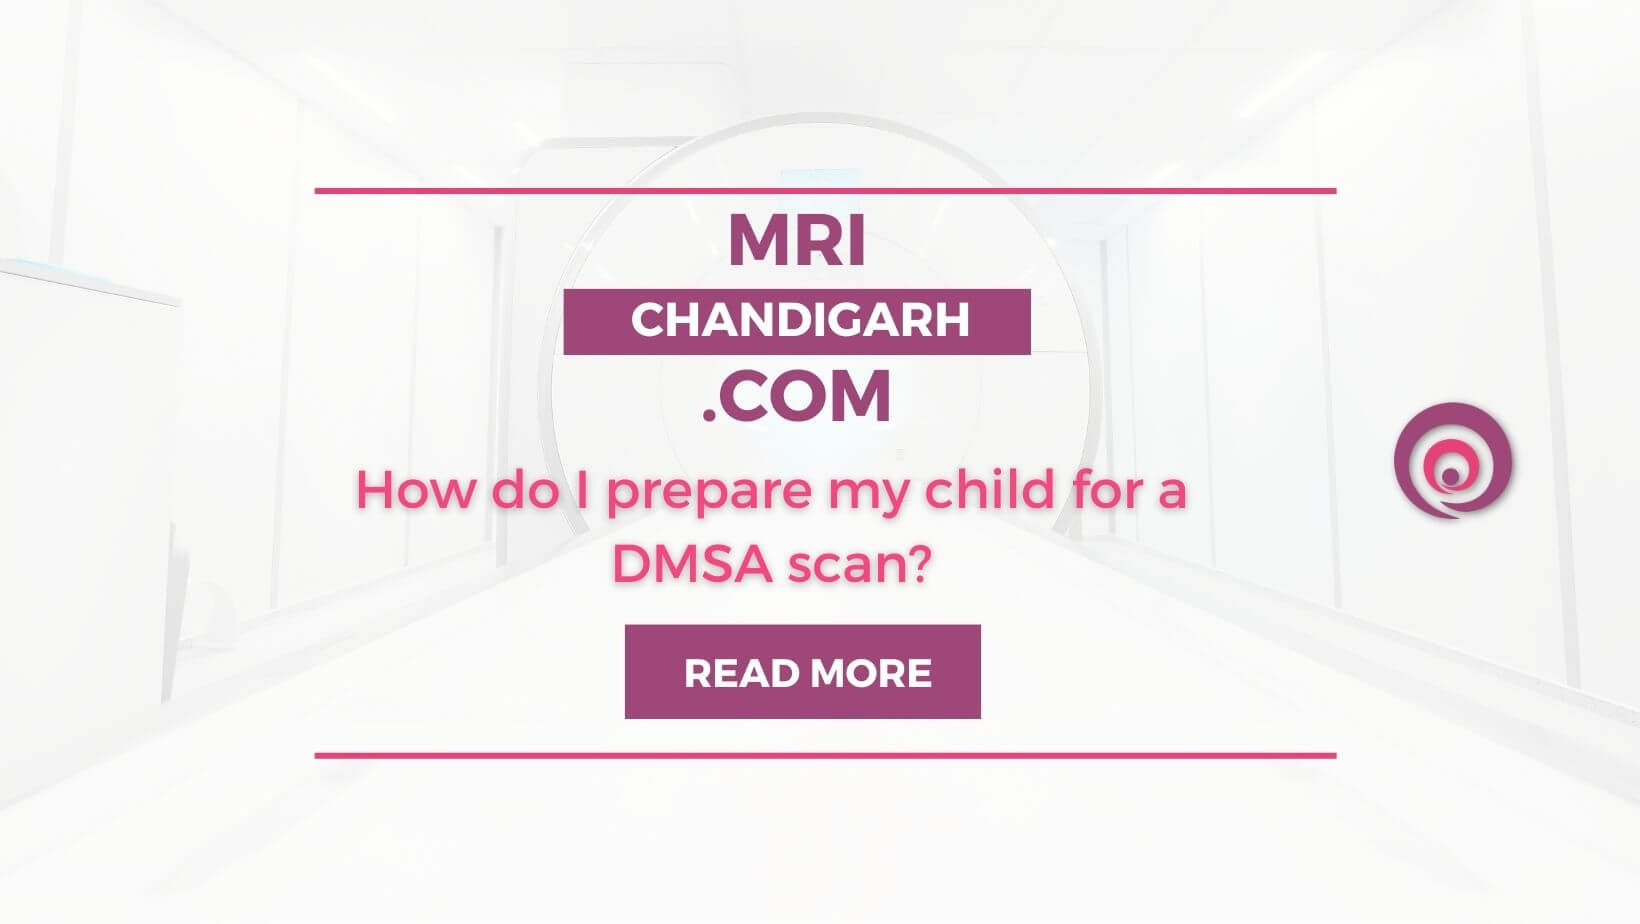 How do I prepare my child for a DMSA scan?